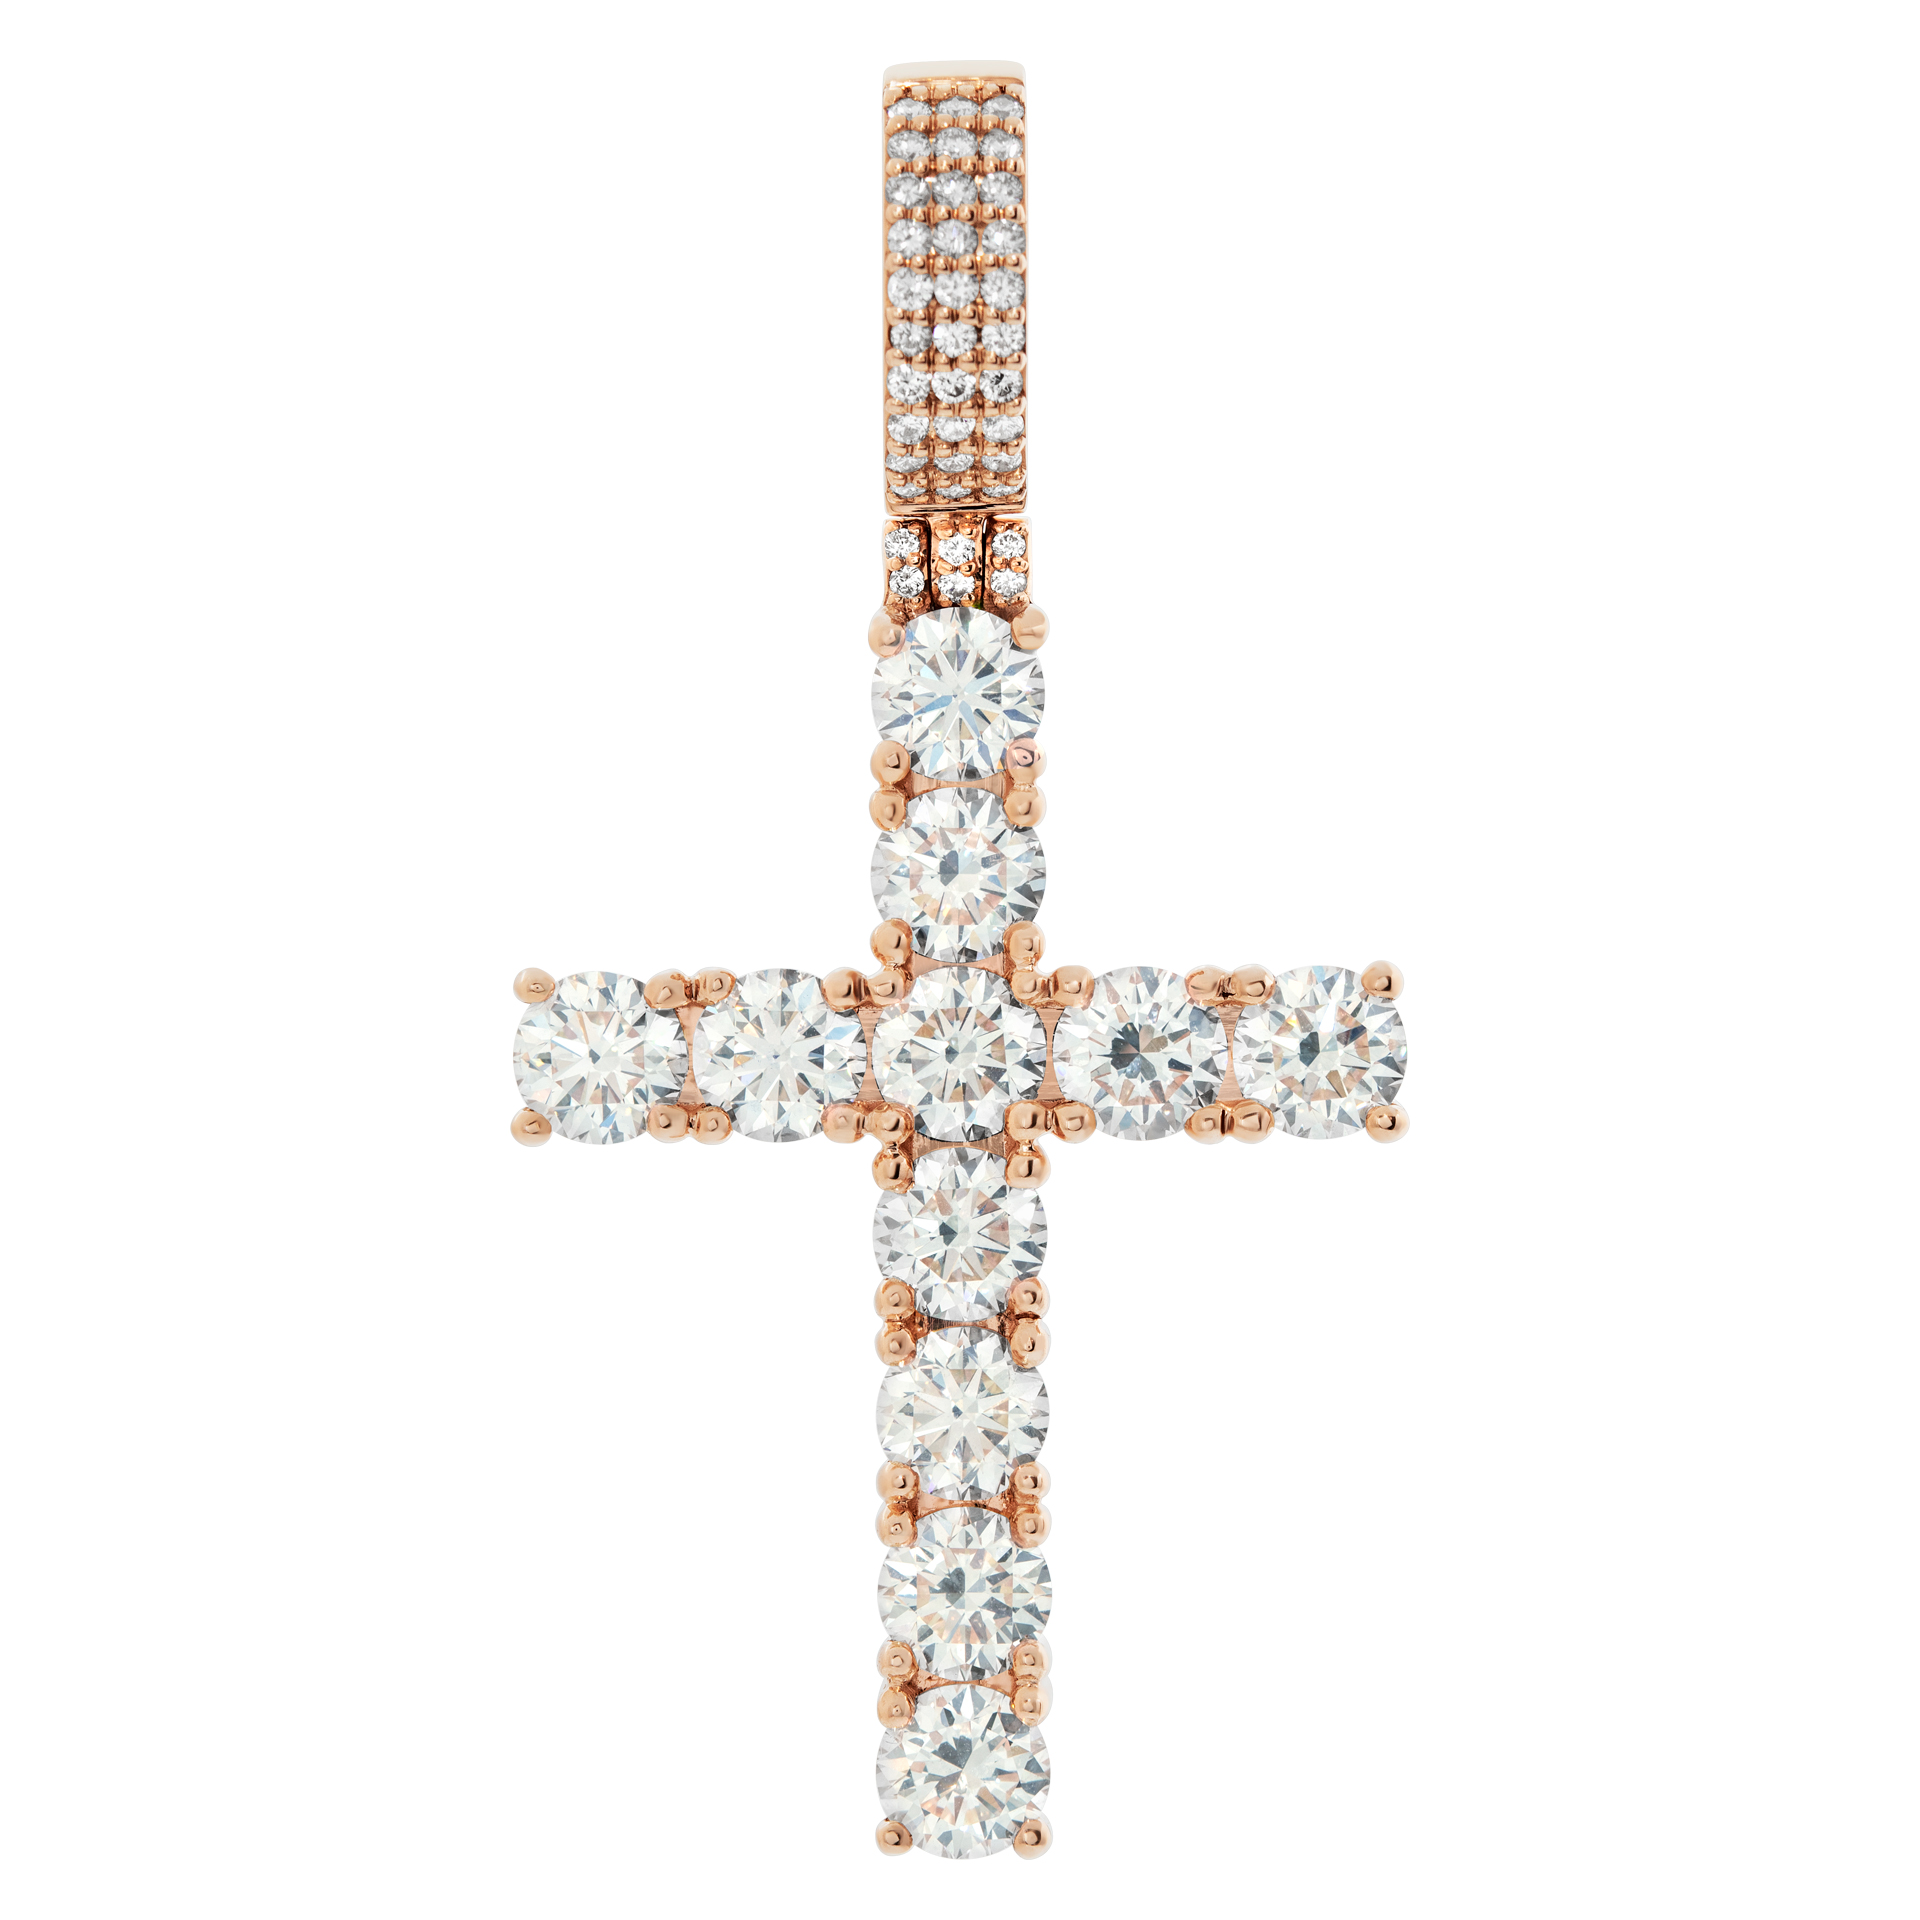 Diamond cross pendant in 14k rose gold. Round brilliant cut diamonds total approx. weight 8.00 carats.